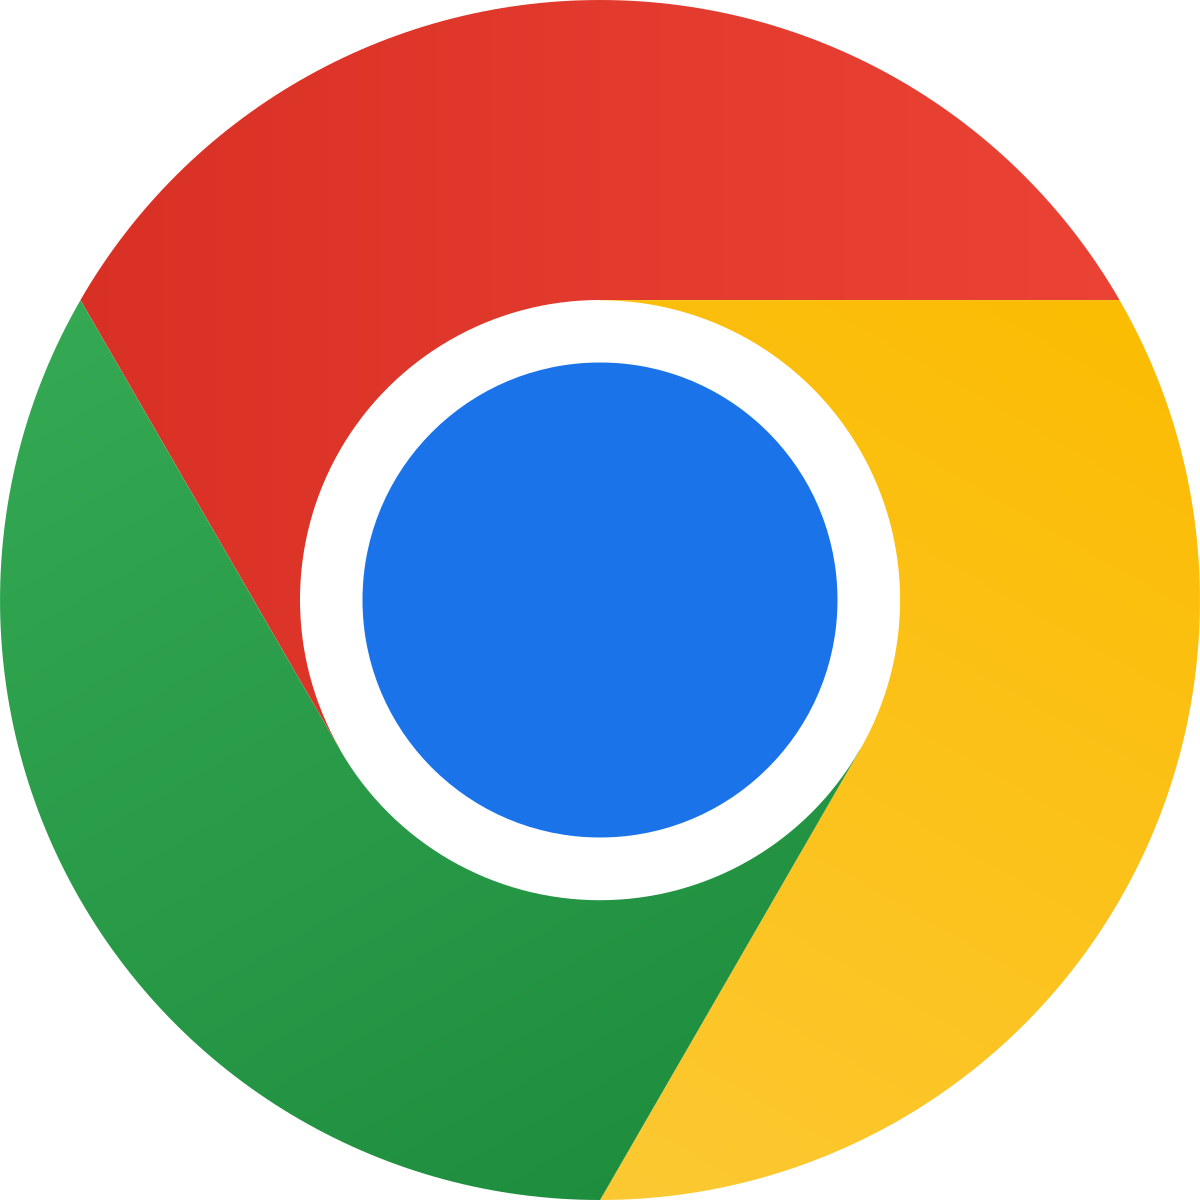 Uninstall Chrome from your computer.
Download the latest version of Chrome from the official website.